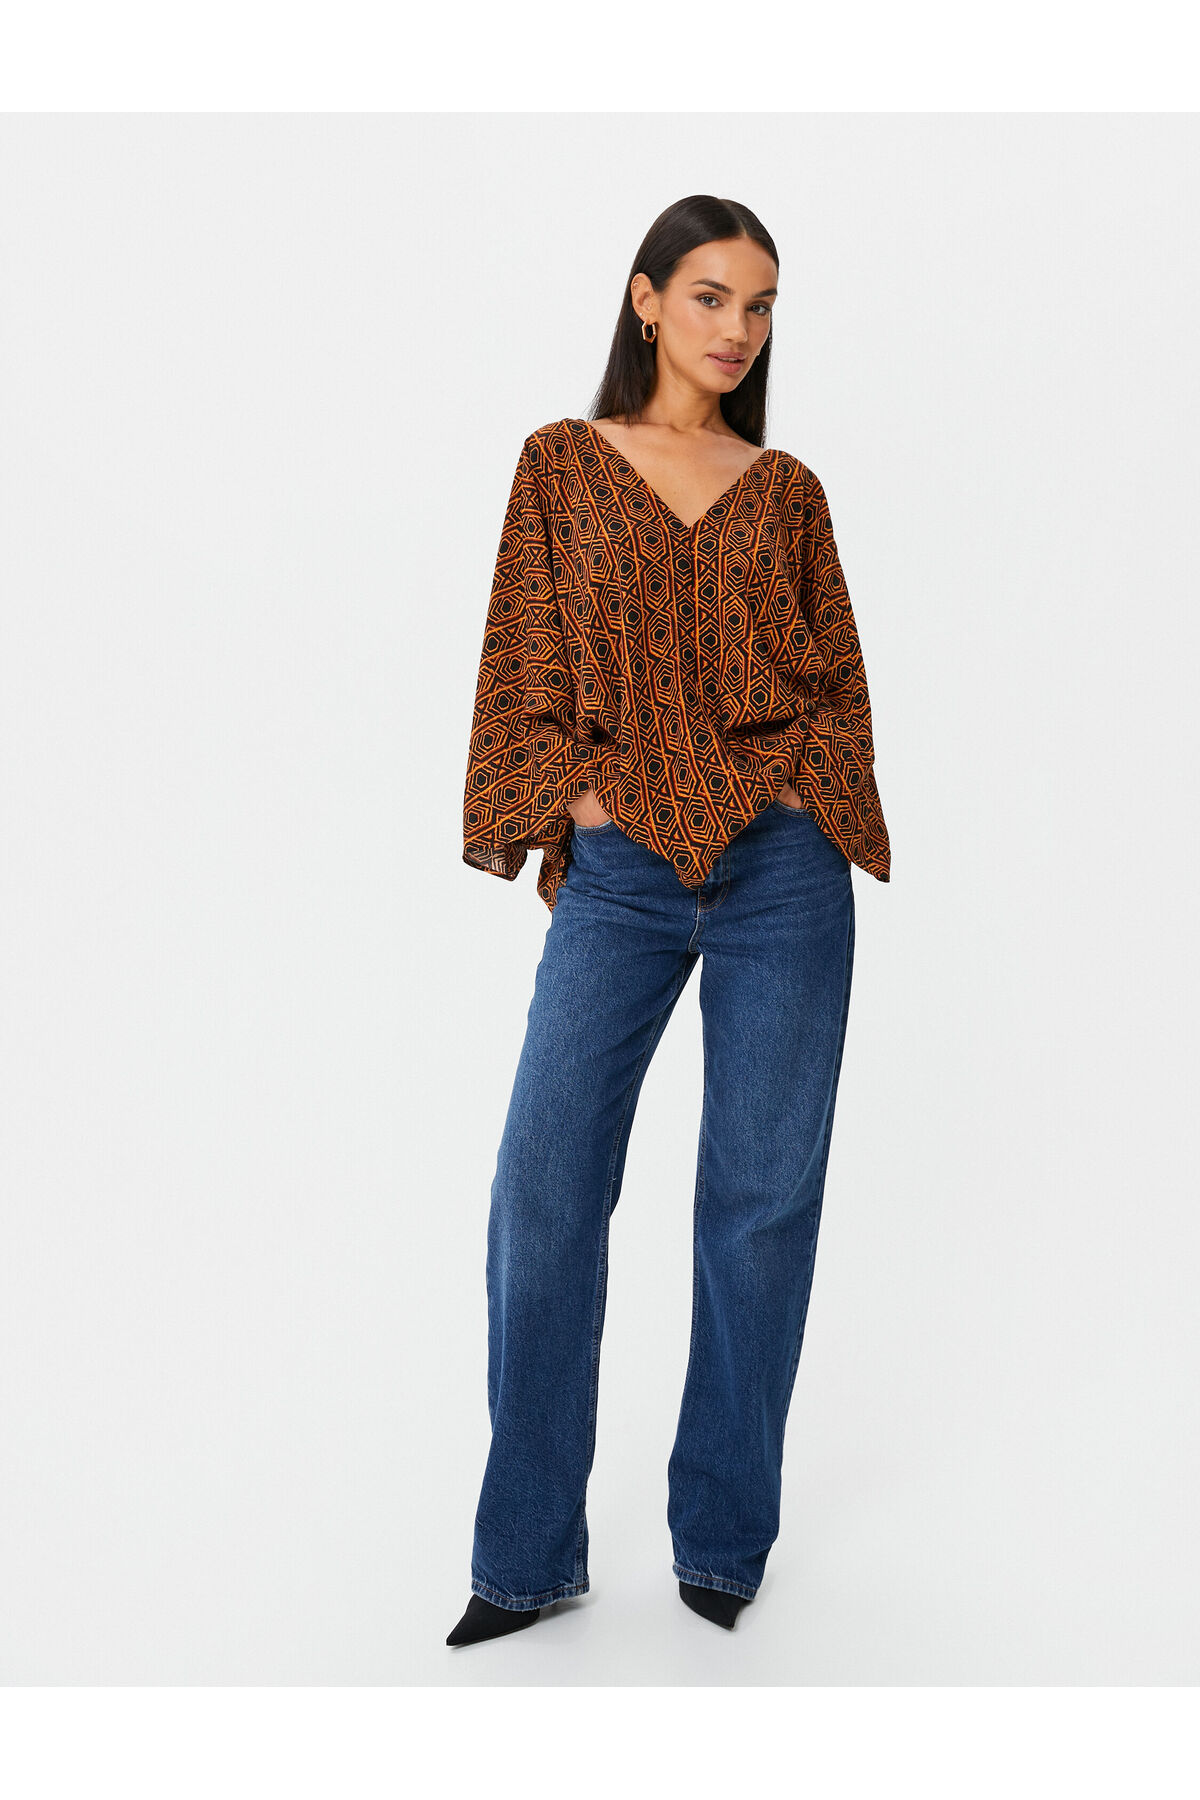 KOTON Relaxed Cut Blouse V-Neck Ethnic Patterned Wide Sleeve Viscose